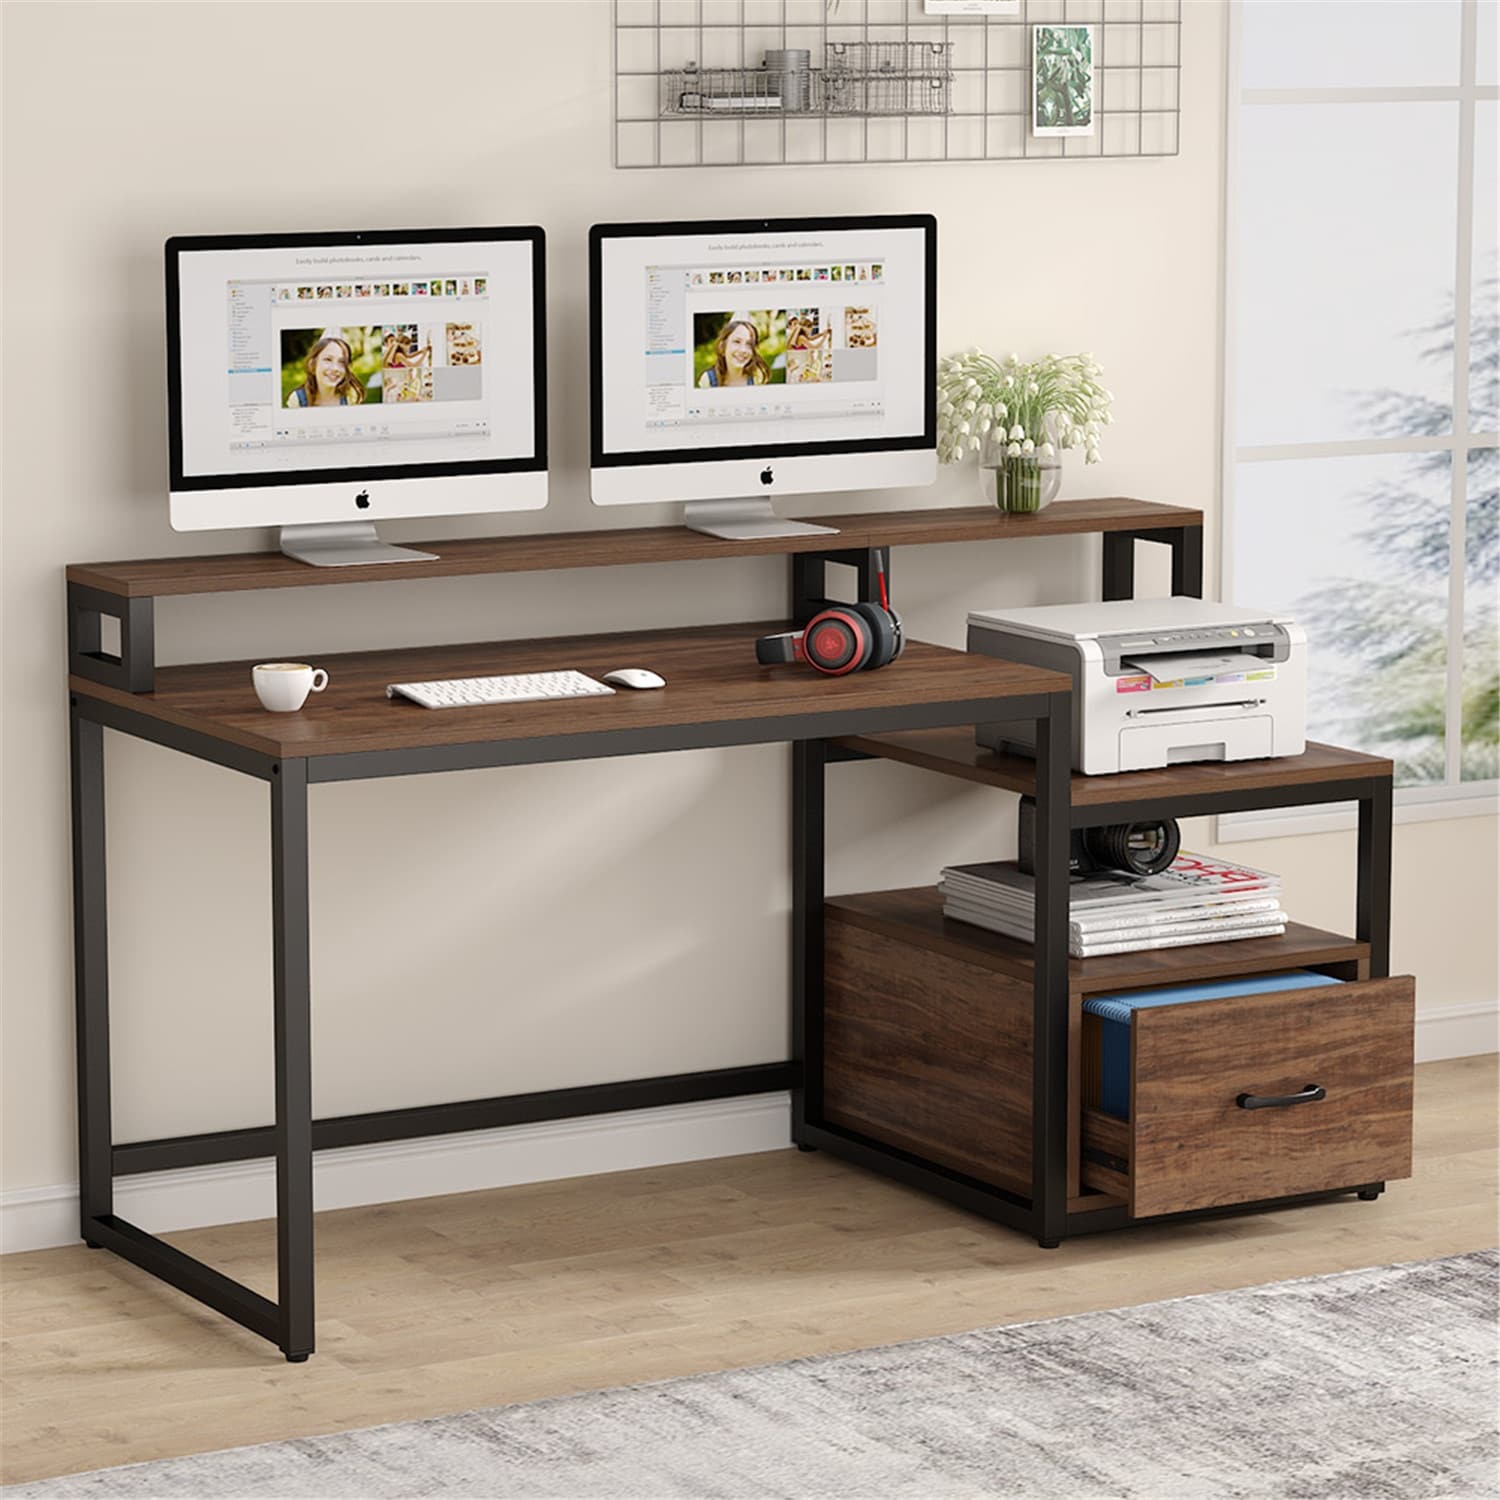 Tribesigns Computer Desk, Large Office Desk Computer Table Study Writing  Desk for Home Office, Walnut + Black Leg, 63 X 23.6 inch